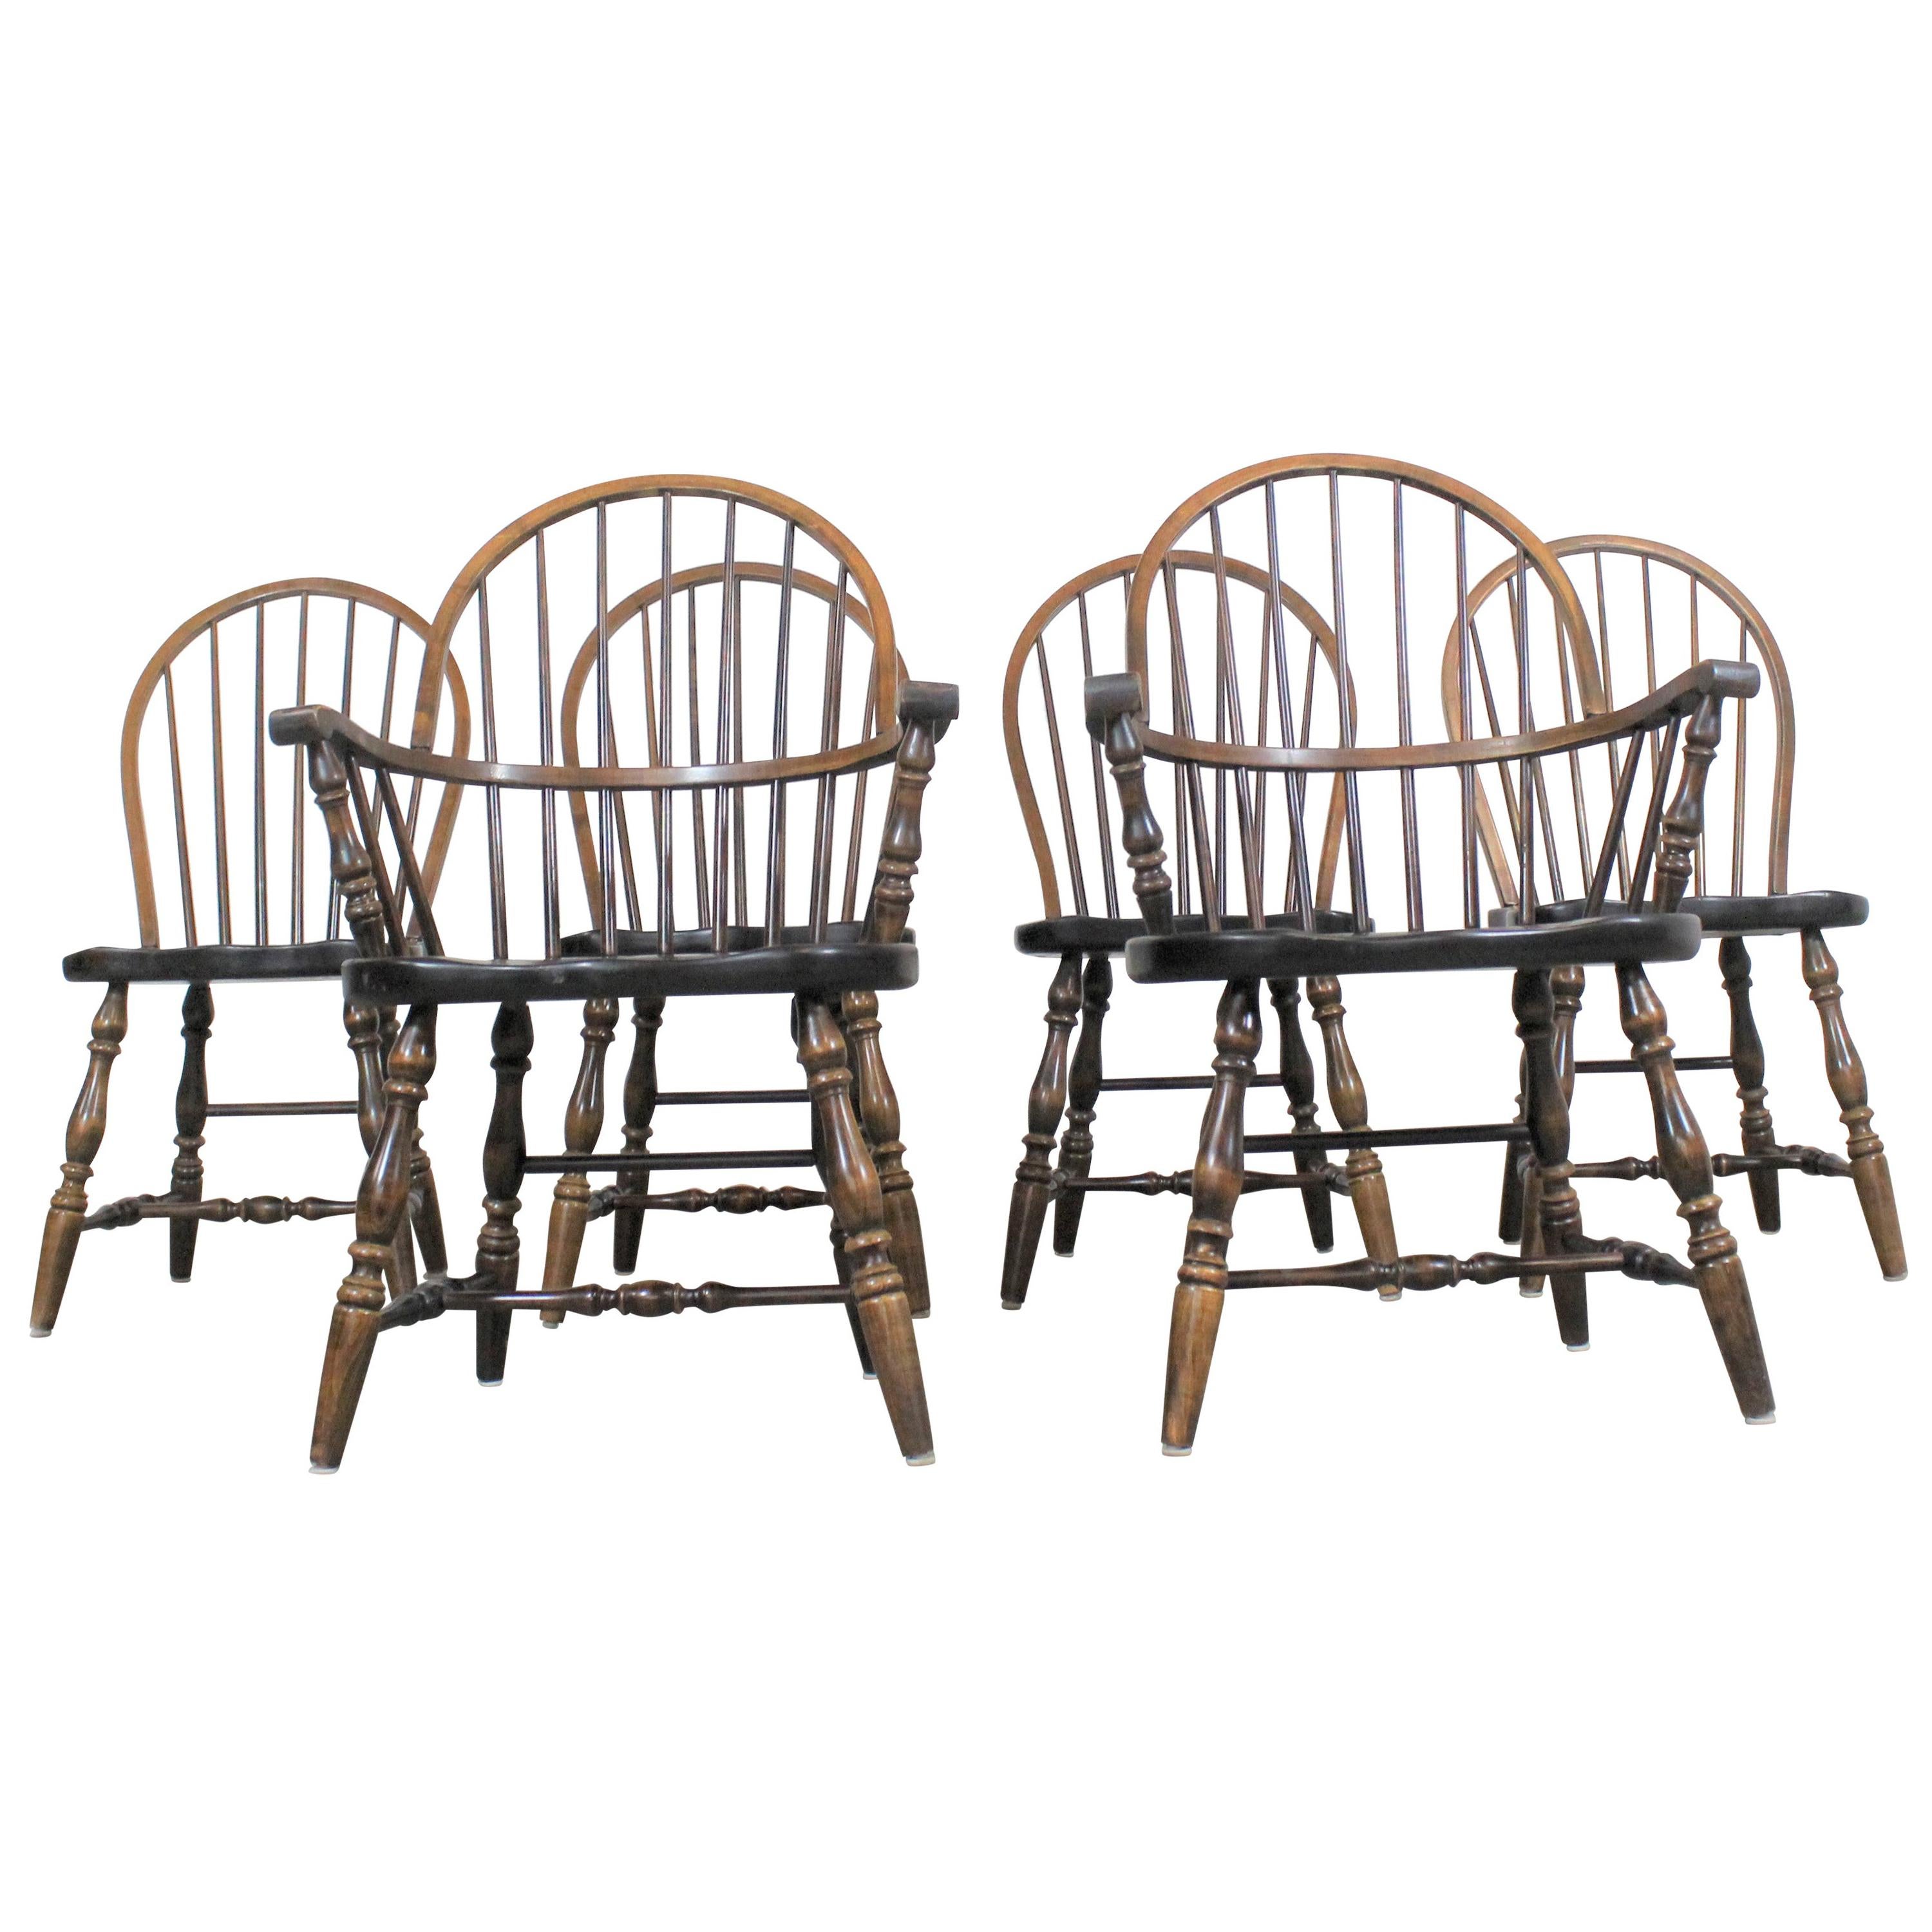 Set of 6 Pine Hoop Back Windsor Ethan Allen Style Chairs